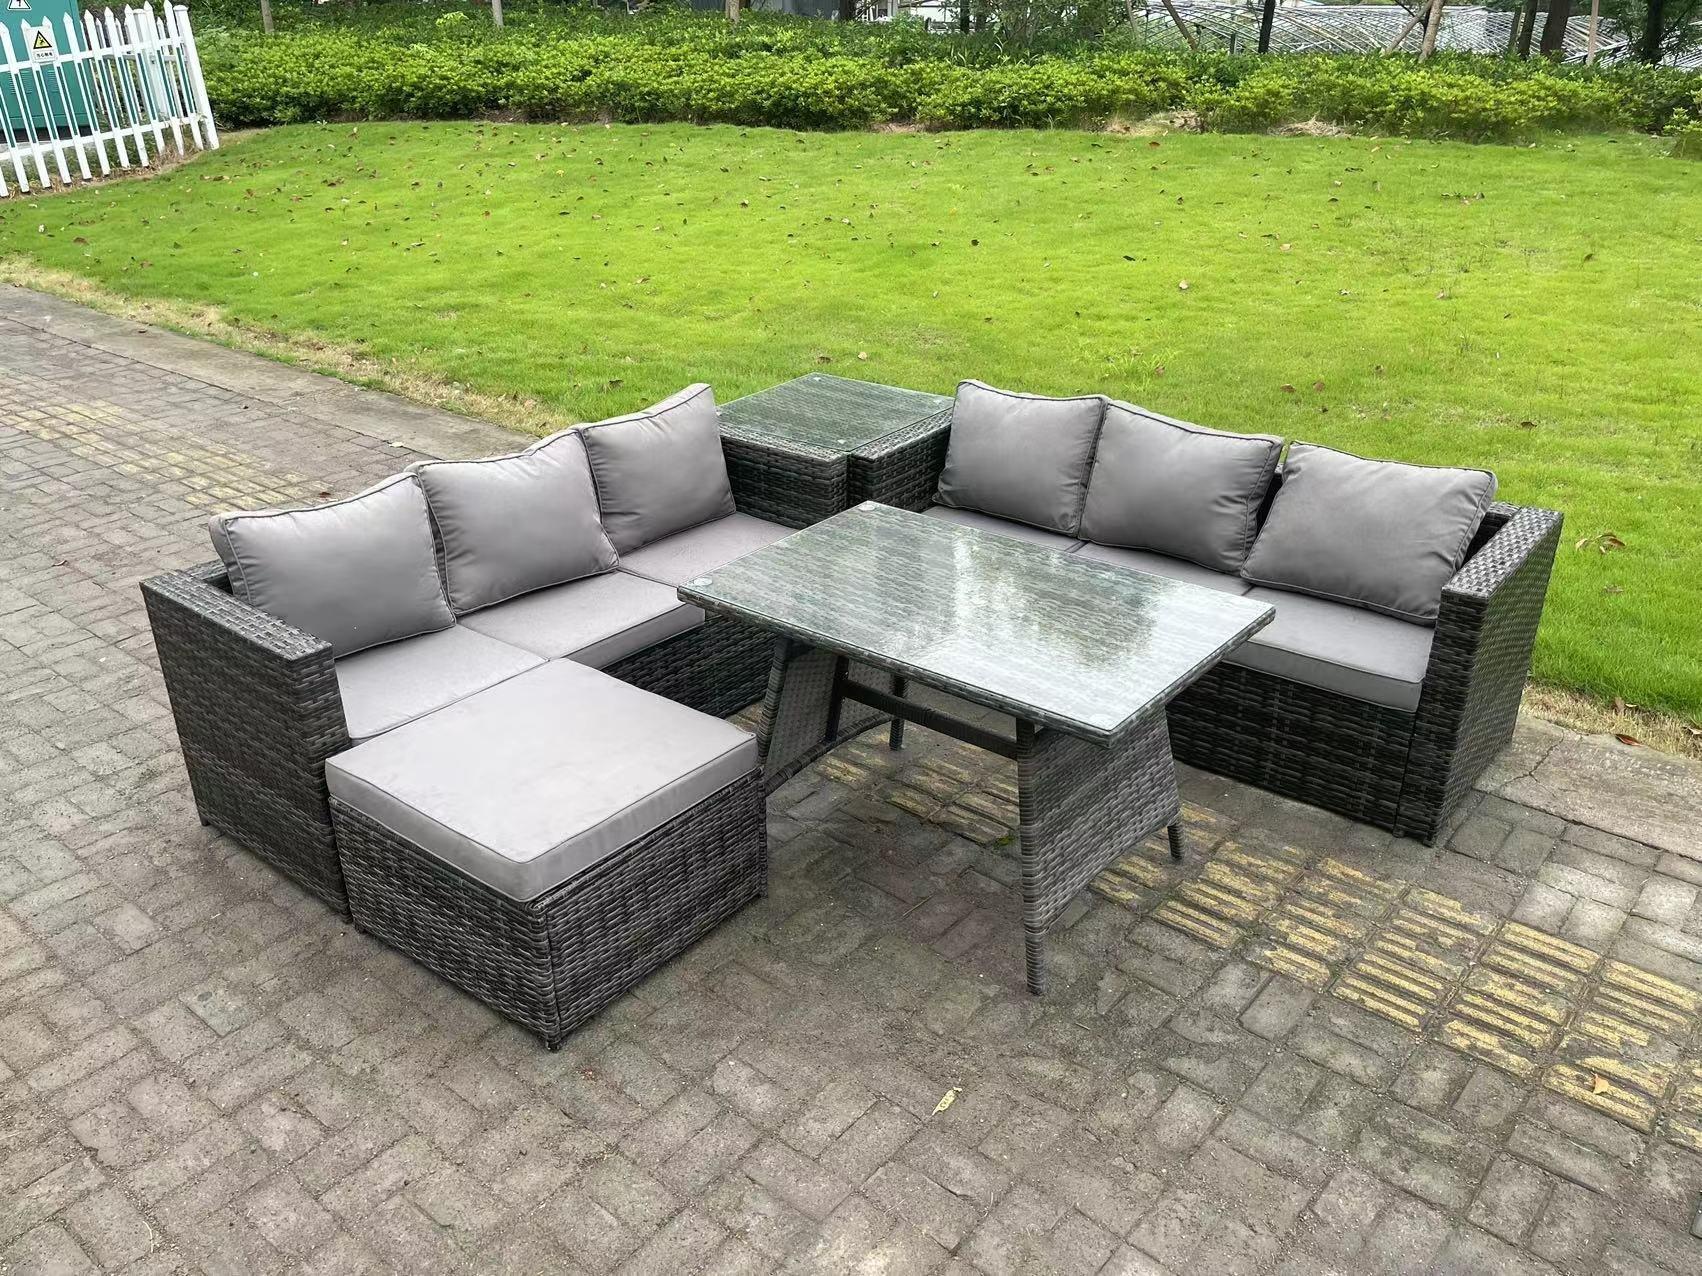 7 Seater Rattan Garden Dining Set Outdoor Furniture Sofa with Dining Table Big Footstool Side Table